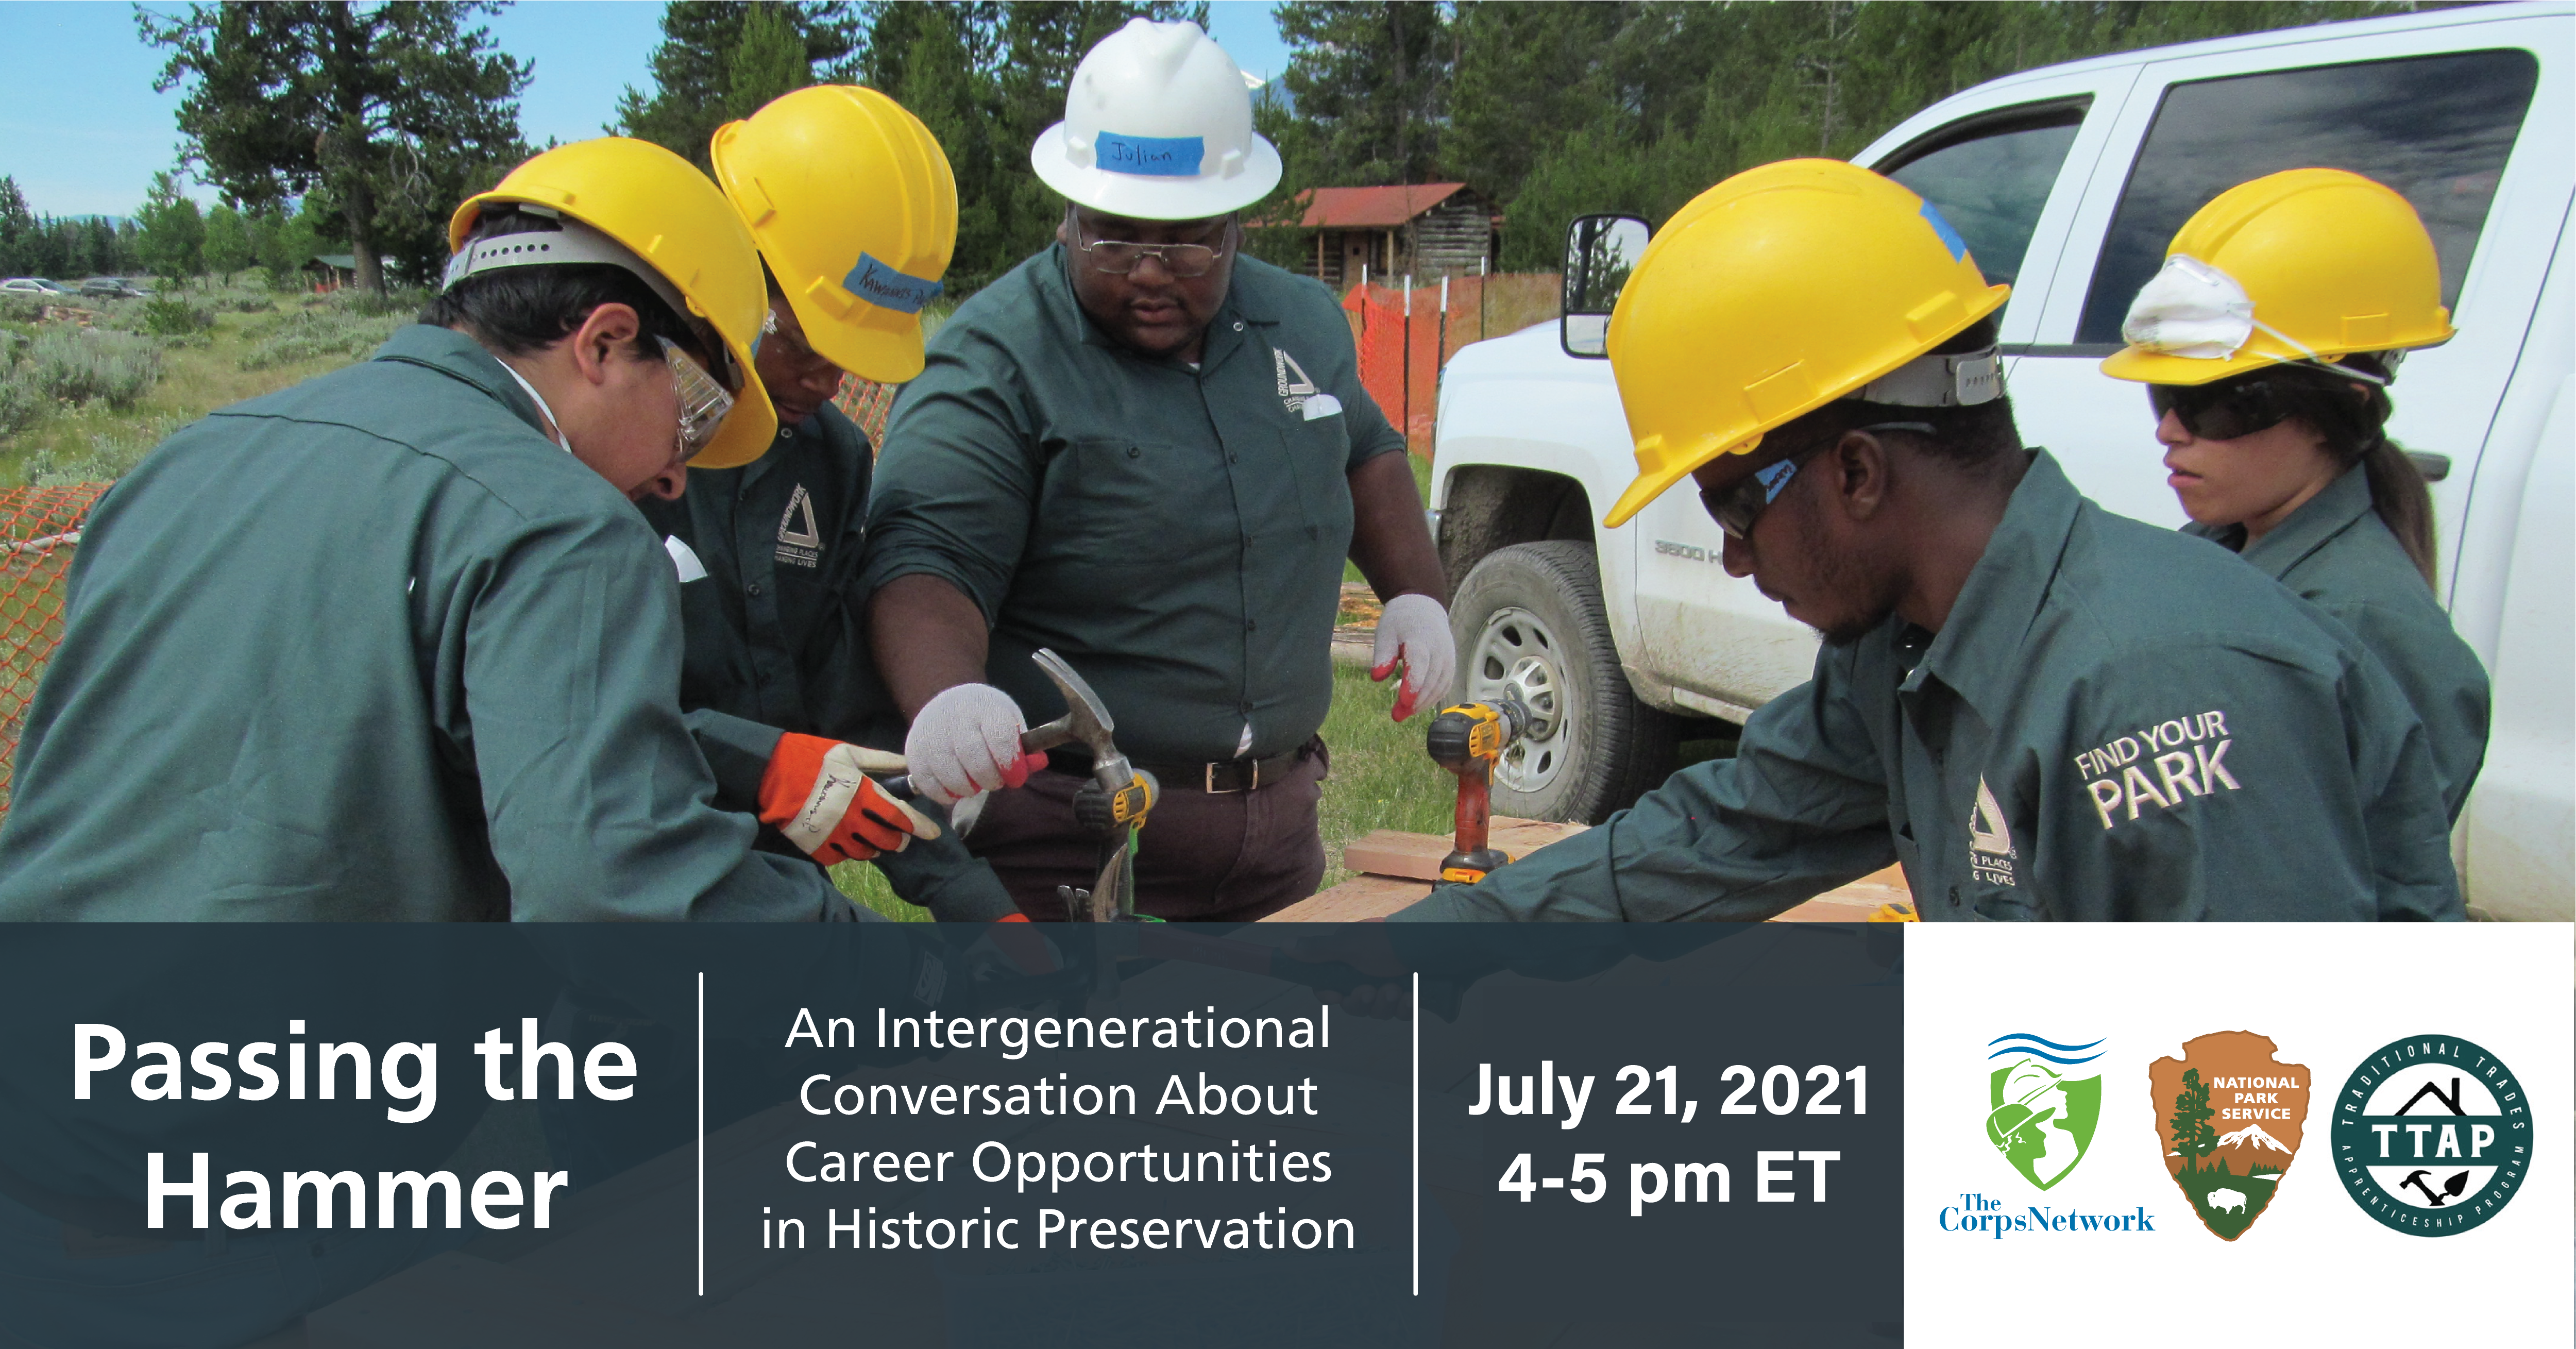 Team woodworking; text reads "Passing the Hammer, An Intergenerational Conversation About Career Opportunities in Historic Preservation. July 21, 4-5 p.m. ET"; includes logos for The Corps Network, National Park Service, and TTAP